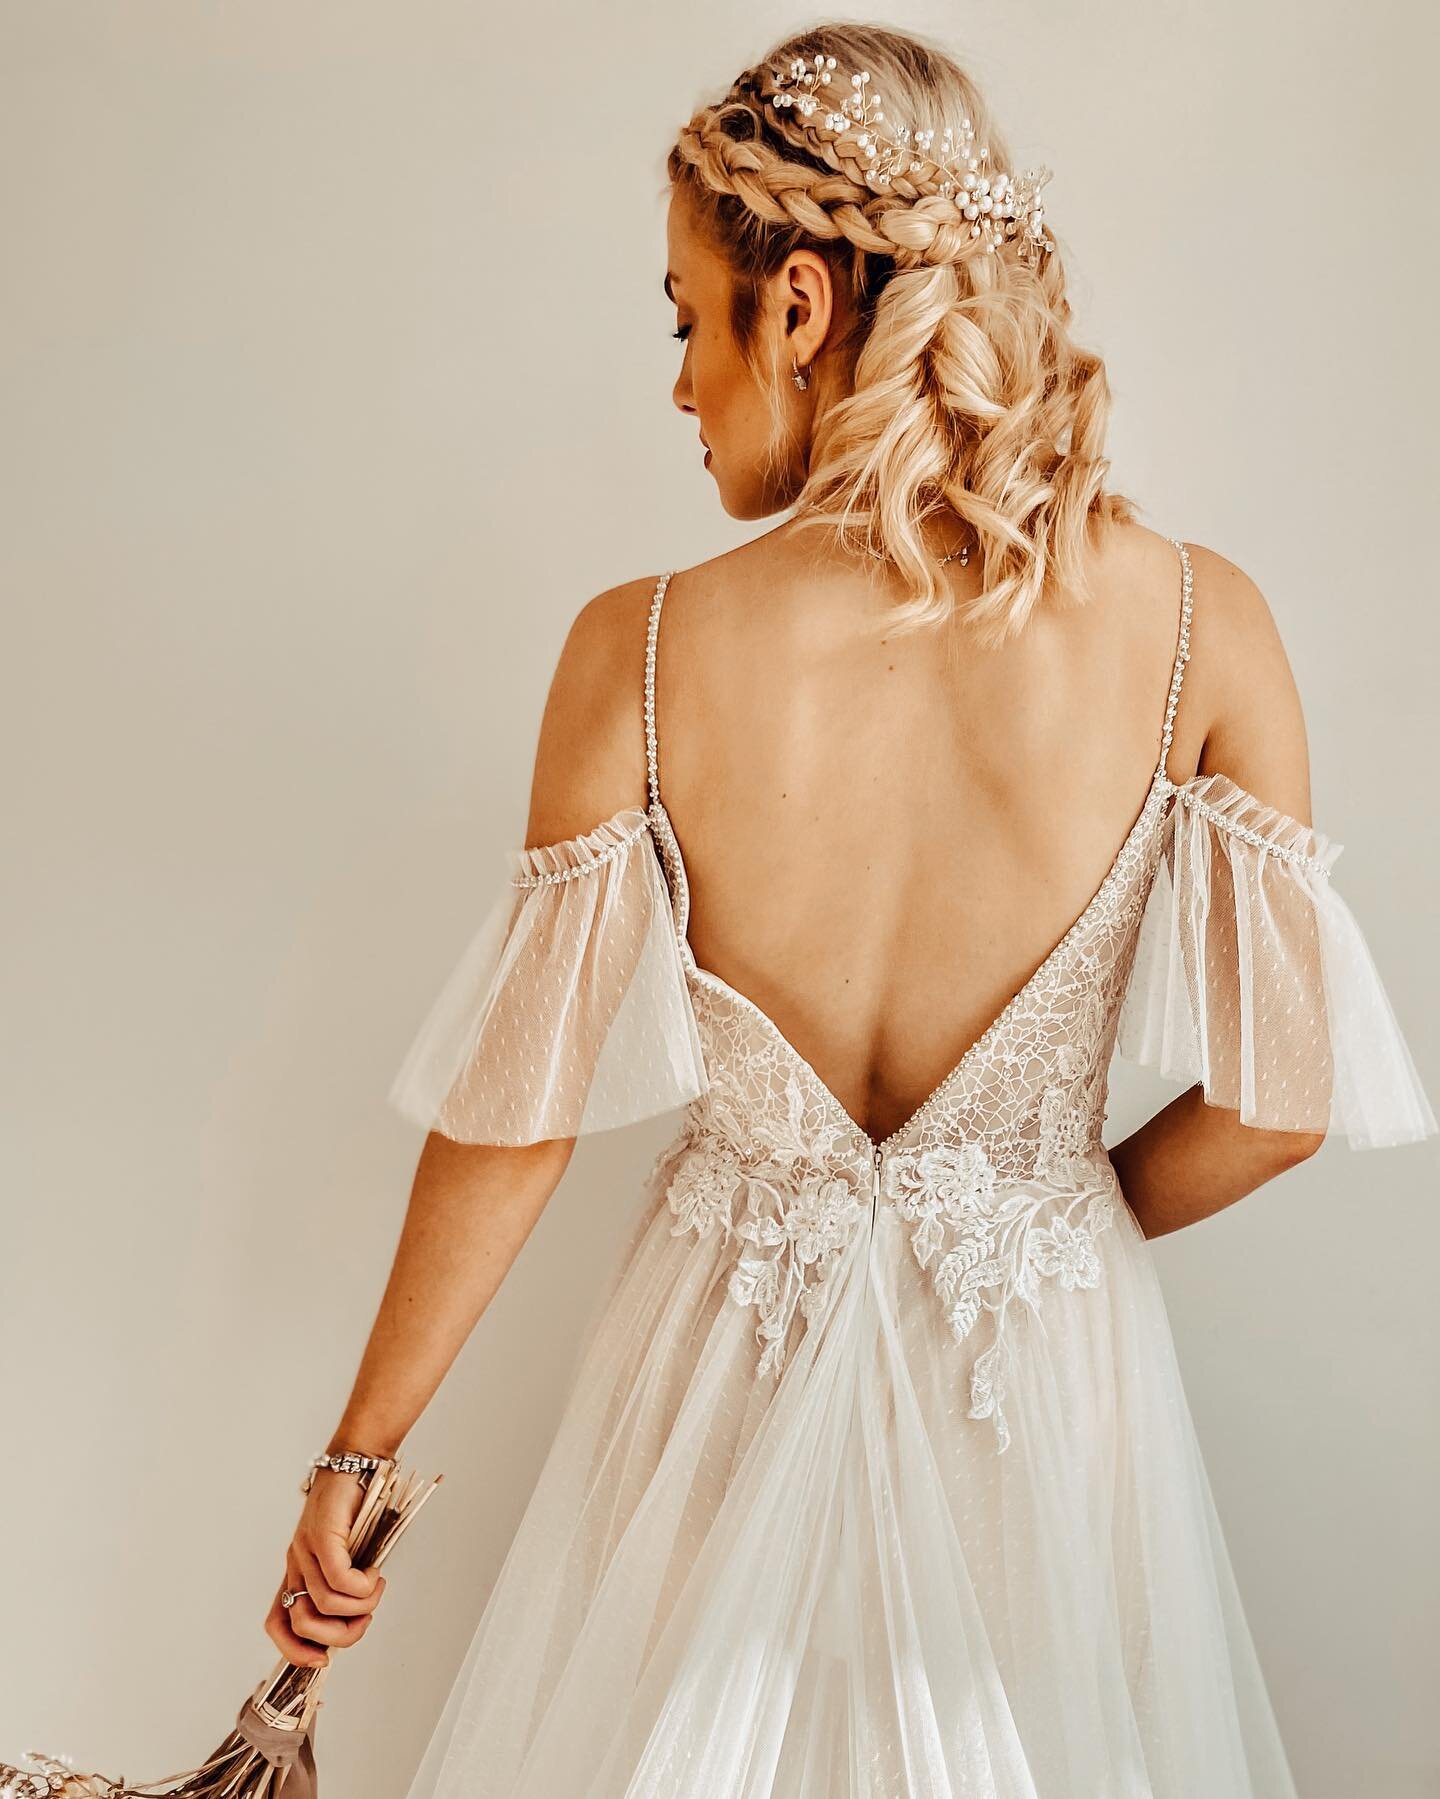 Custom-made, from lower V to the middle V, which one is more you! 

We pride ourselves in taking extra special care with all our wedding dresses. Any of our wedding dress designs can be altered to suit your style.

#misshebridal #custommadedress